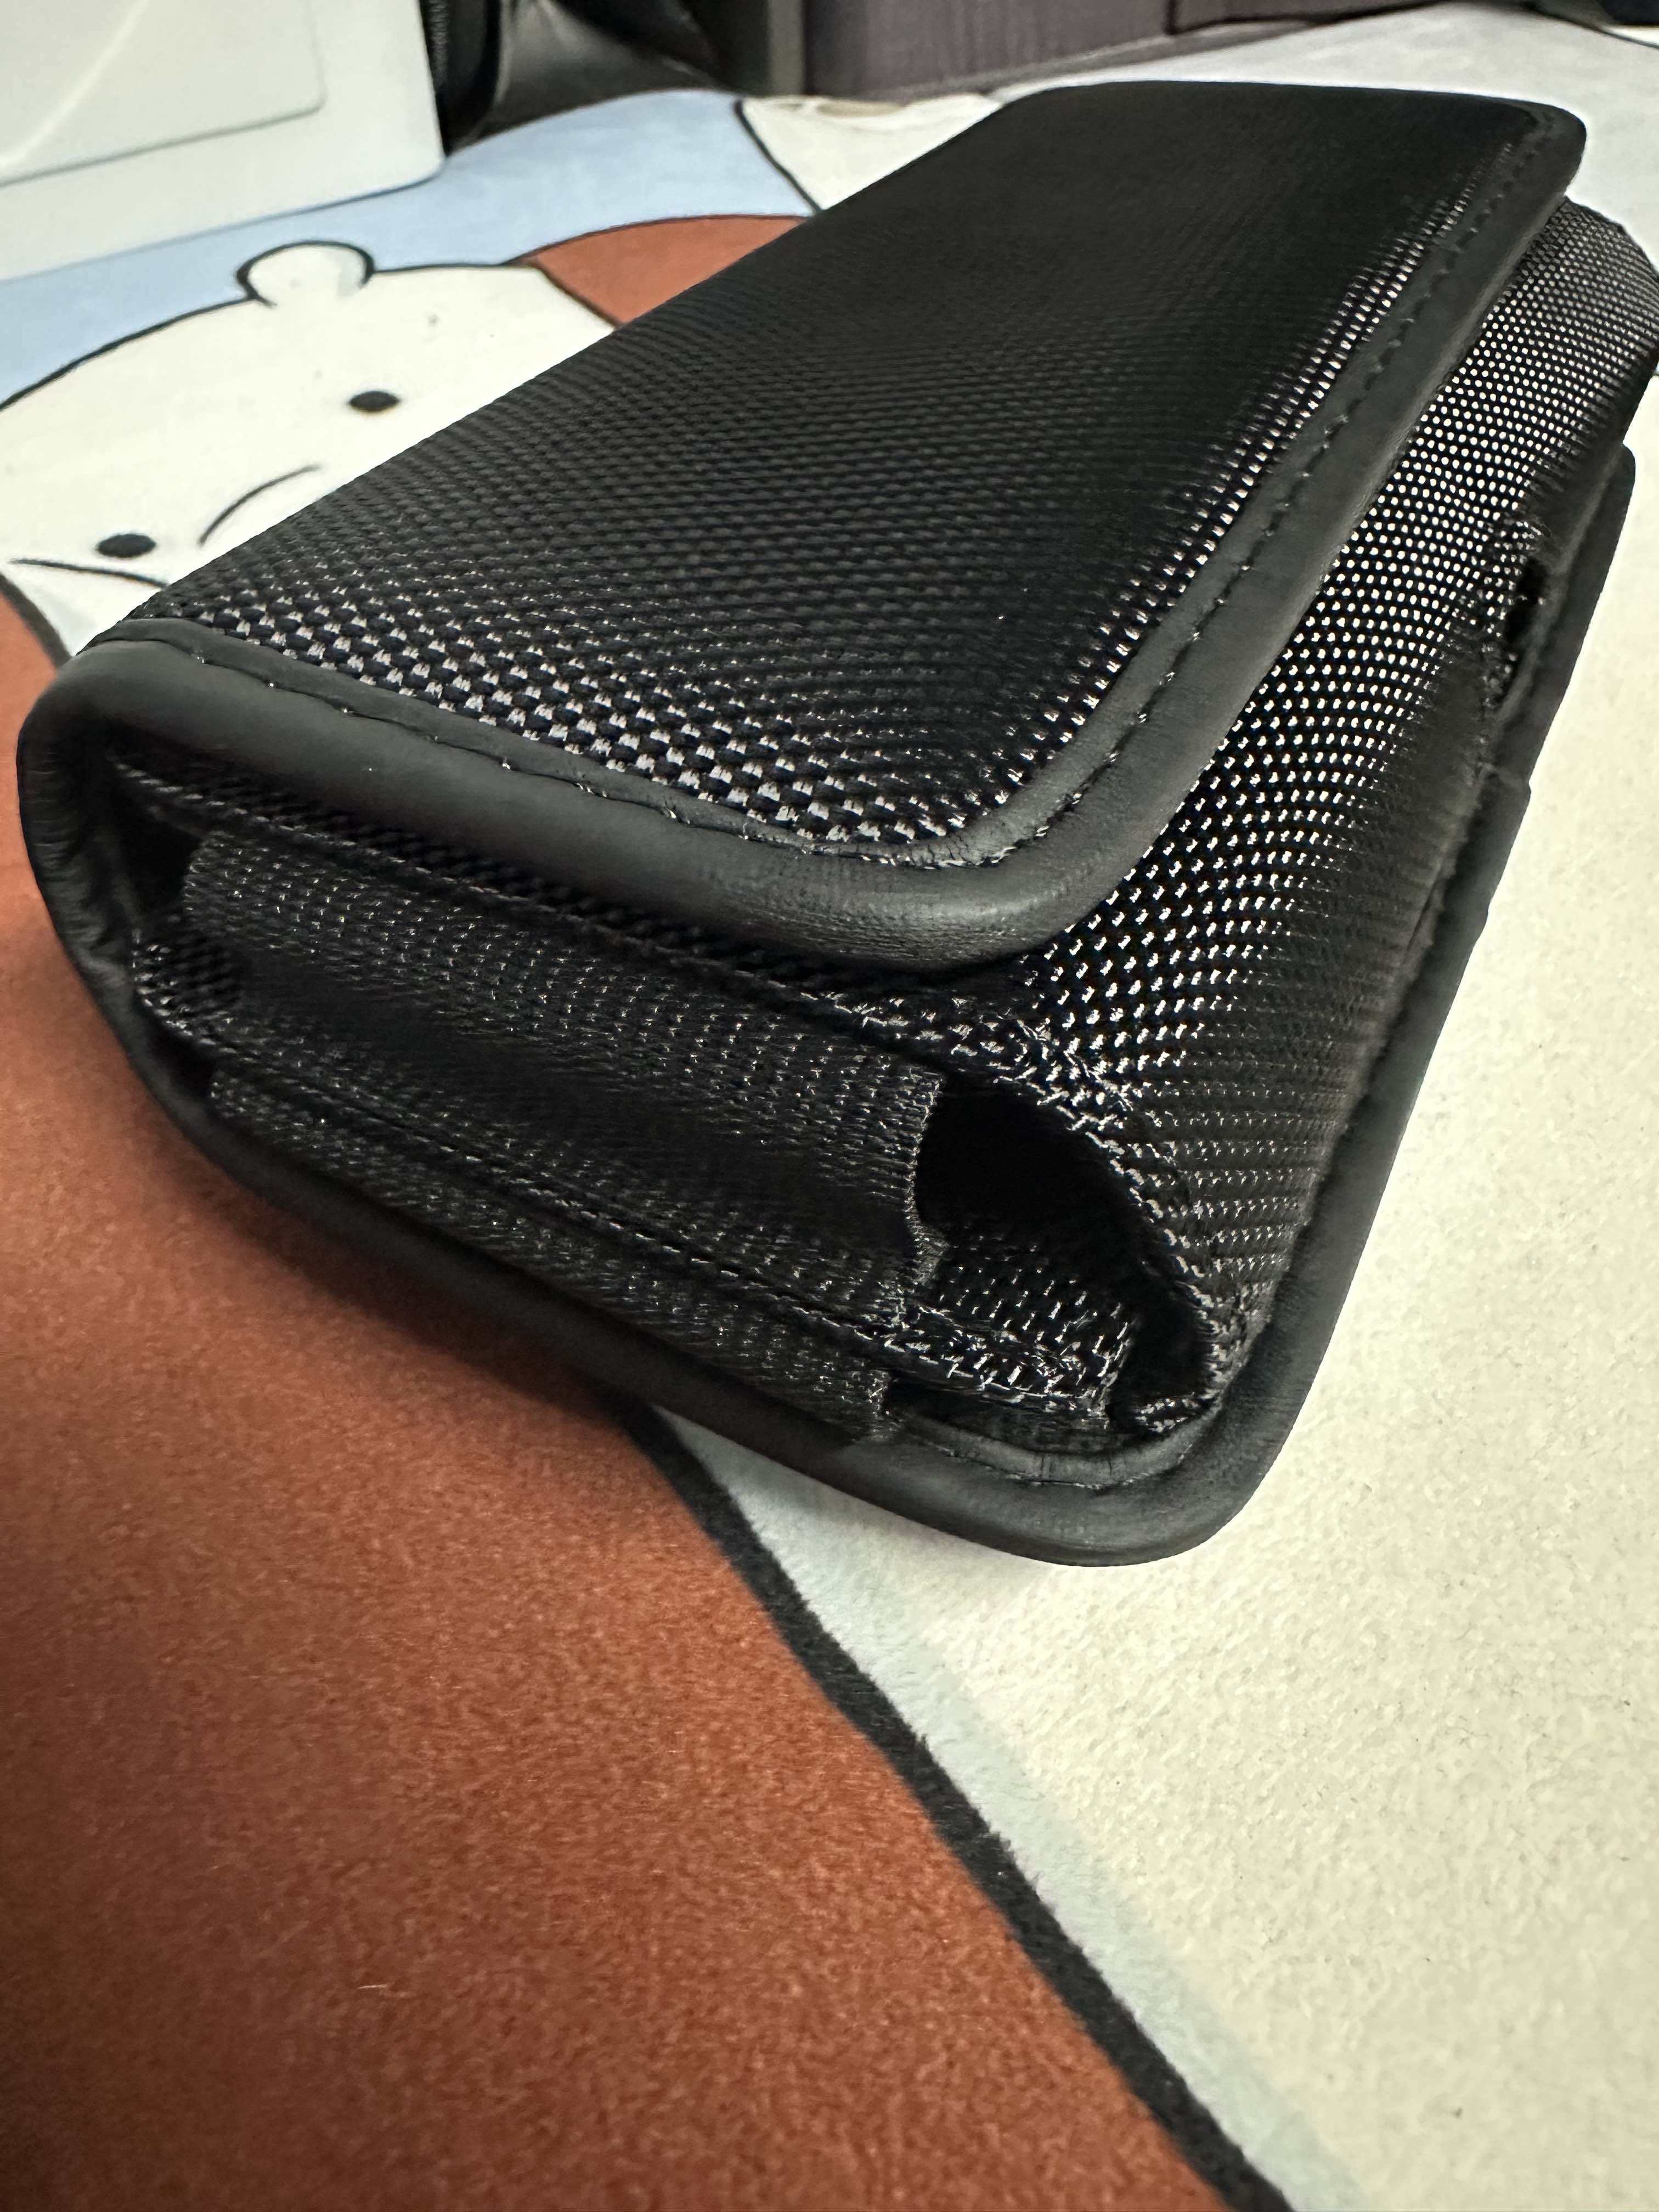 Nylon Dual Phone Holster Pouch Case fit 2 Cell Phones for iPhone  14/13/12/11 Pro Max Samsung Note 20 Note10+ Galaxy S20+ S20